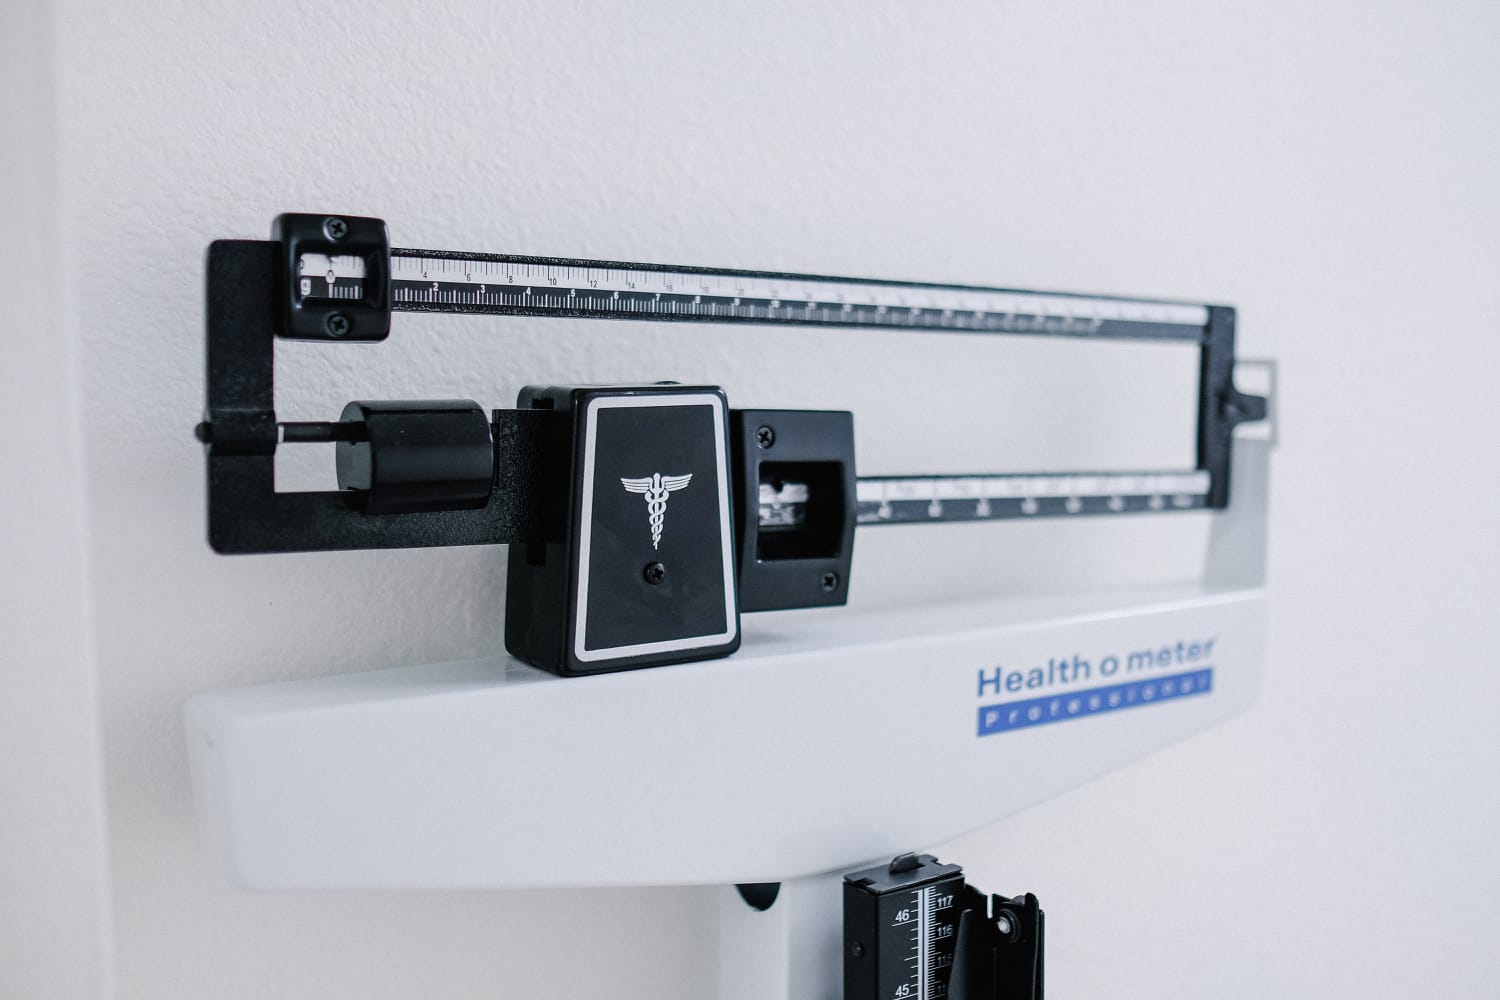 A doctor's office weight scale, often used to calculate body mass index (BMI)